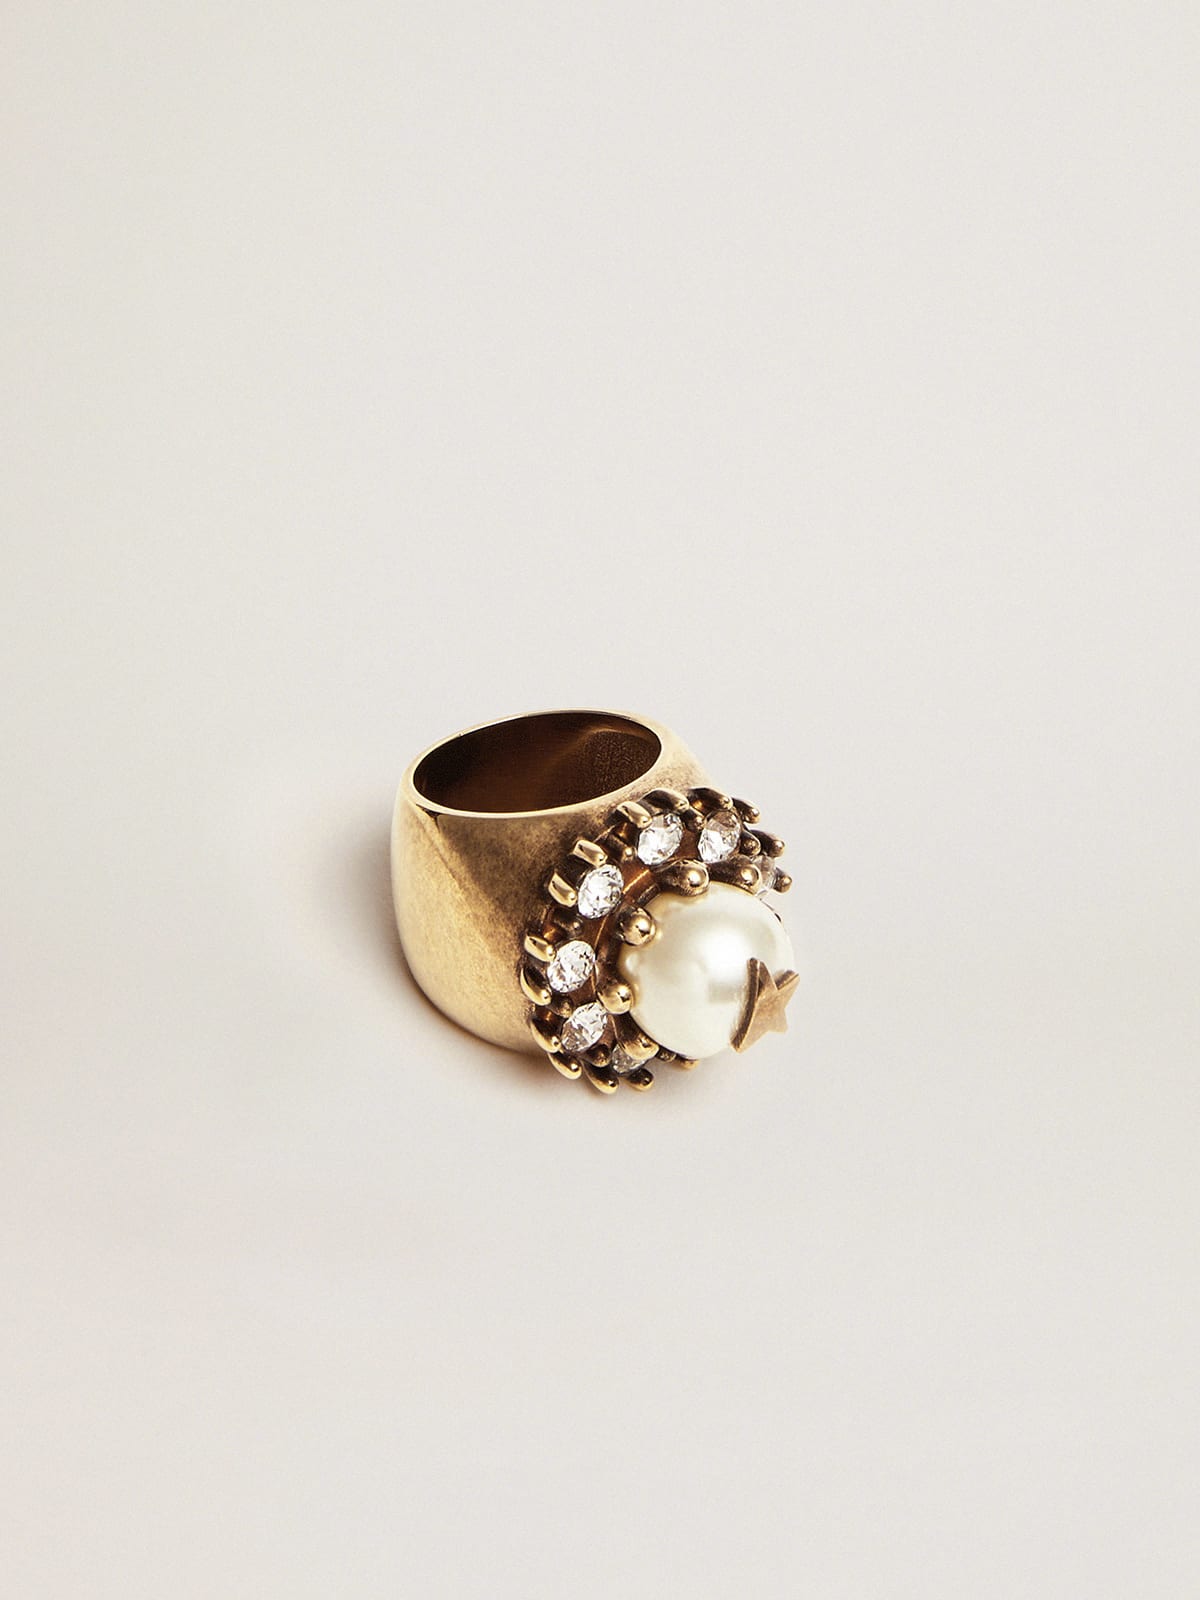 Golden Goose - Women’s ring in old gold color with decorative bead and crystals in 